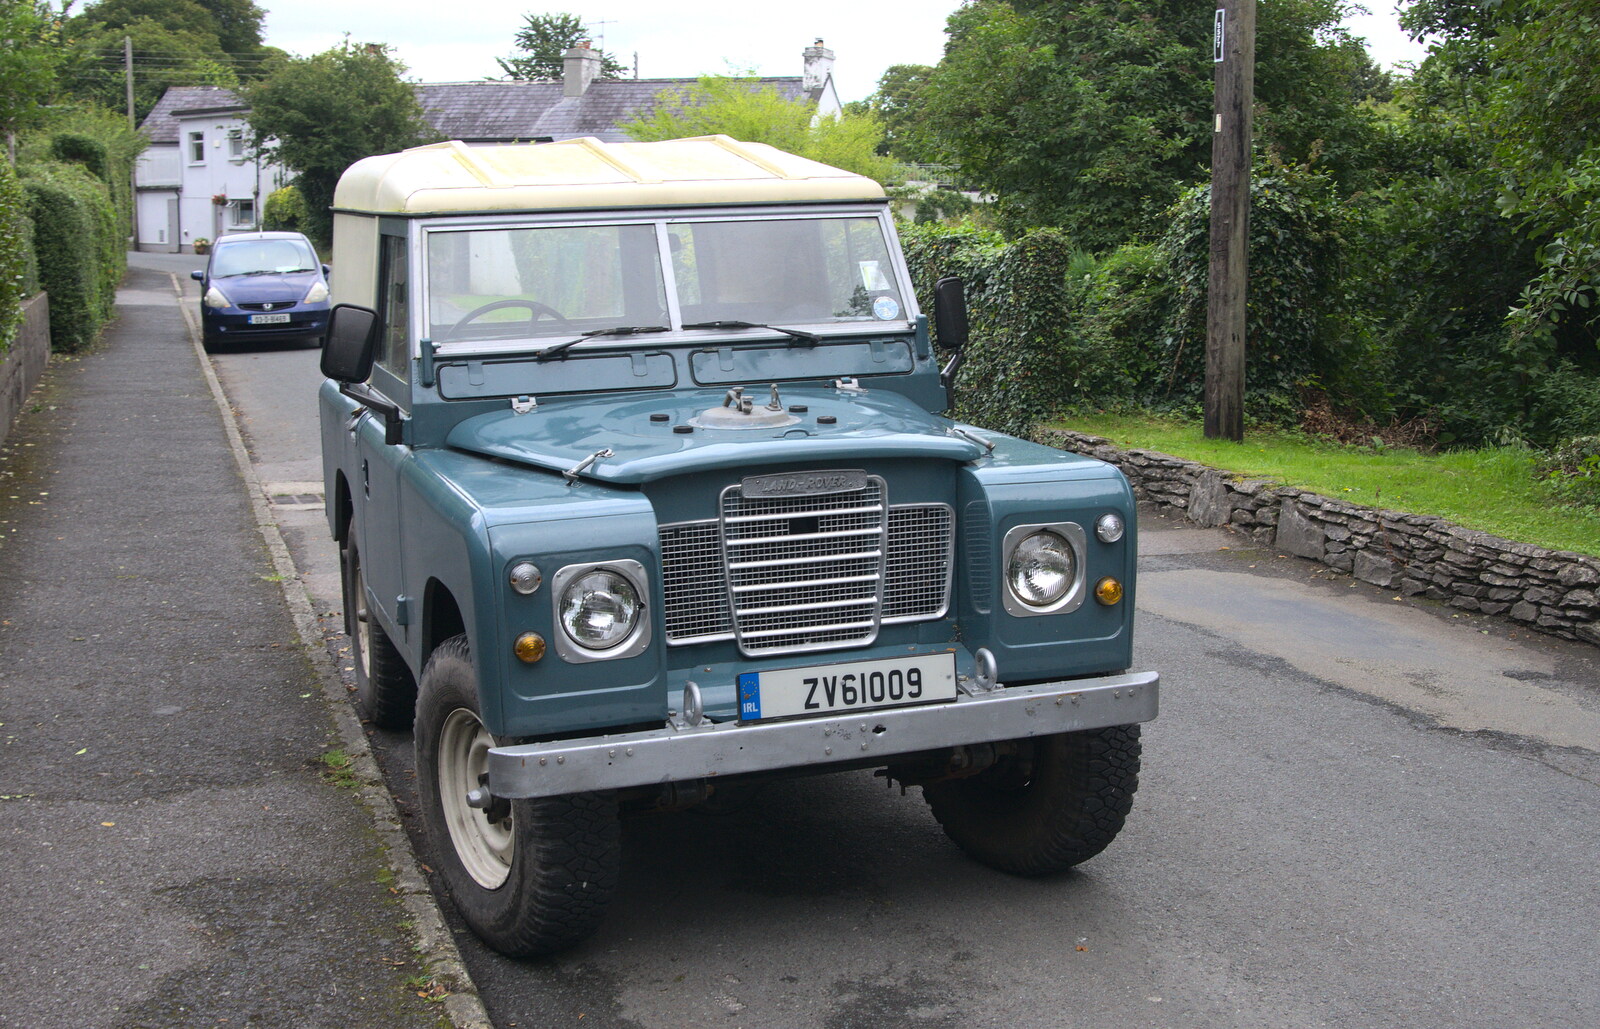 A nice old Land Rover from A Seafari Boat Trip, Kenmare, Kerry, Ireland - 3rd August 2017